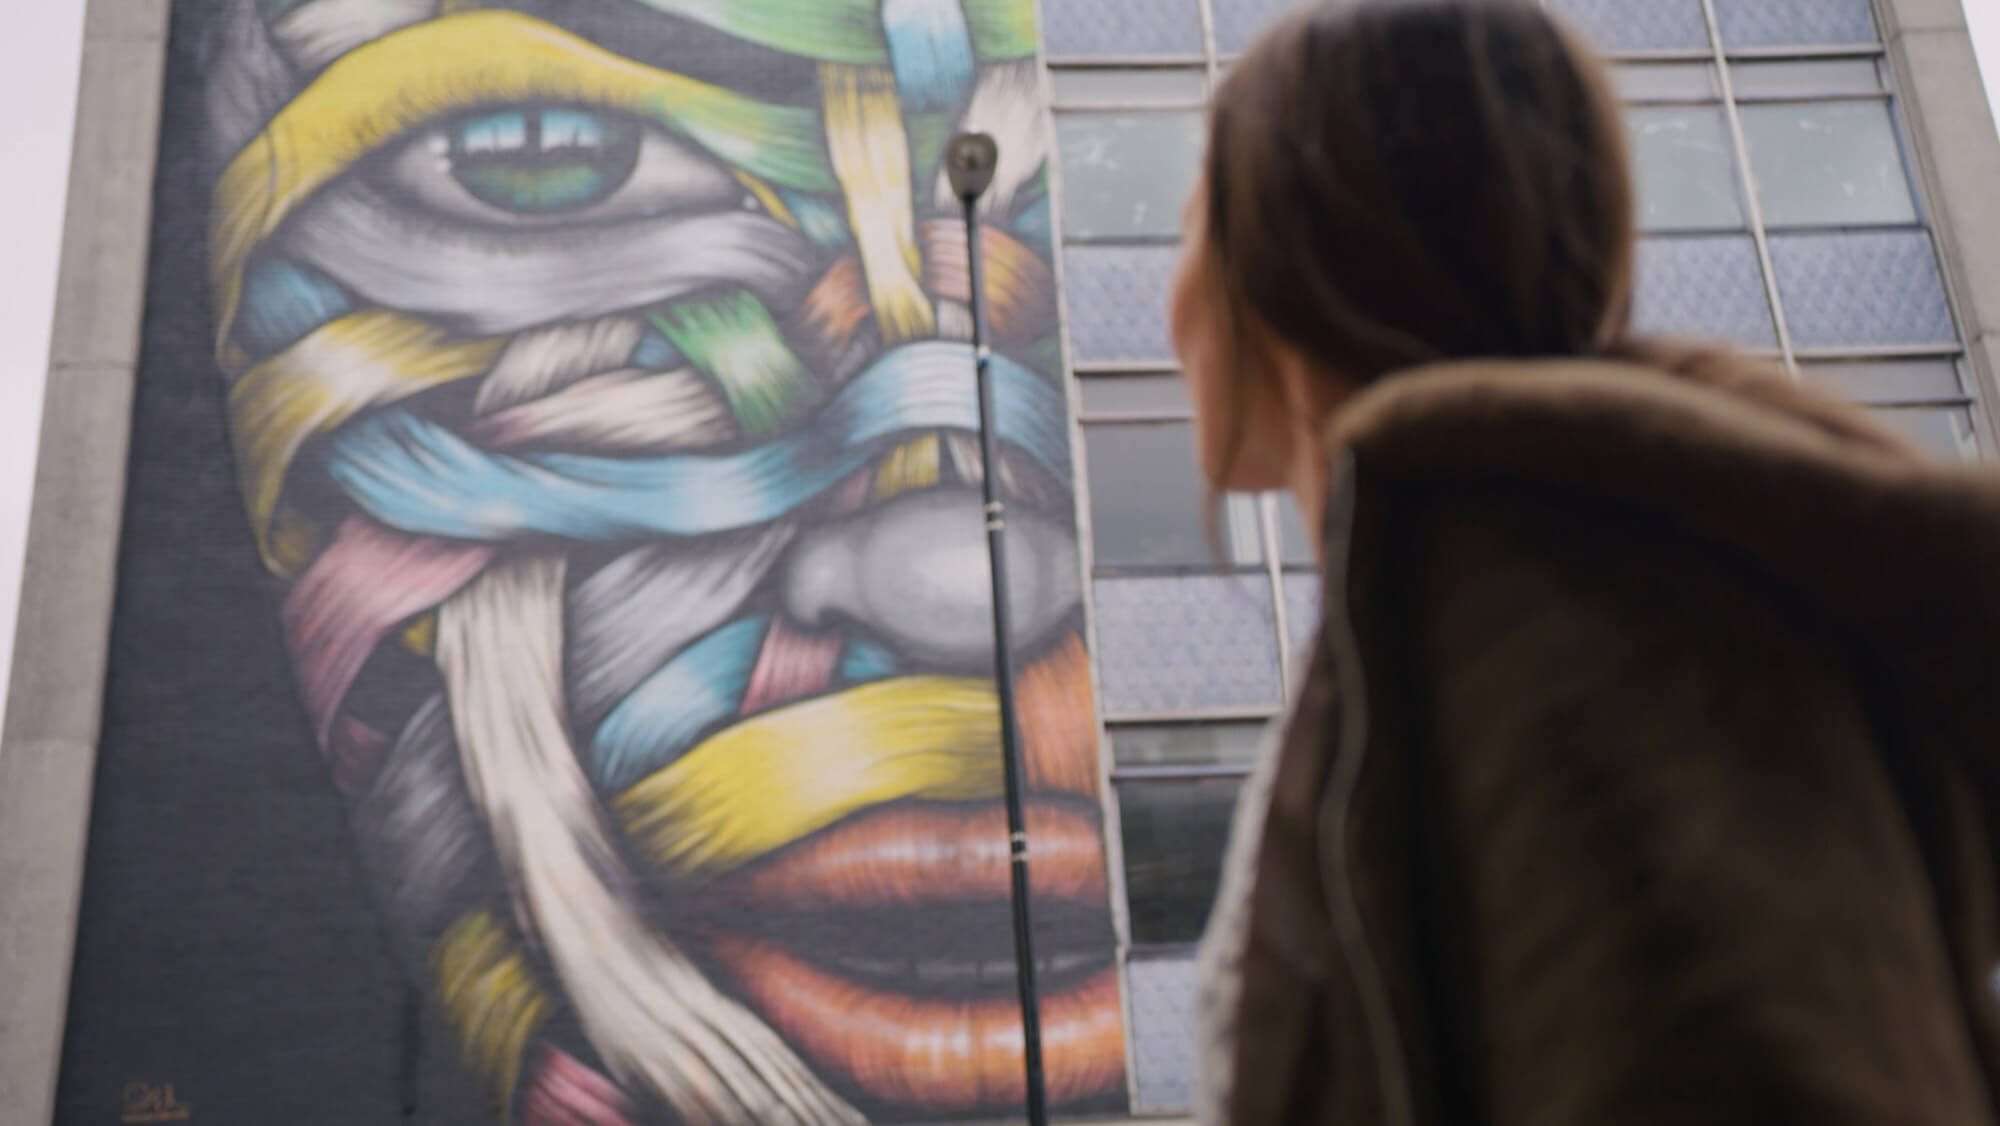 A woman looks at a large colourful mural in the street in our Spaces Property Showreel, from the Rise Media case studies archive